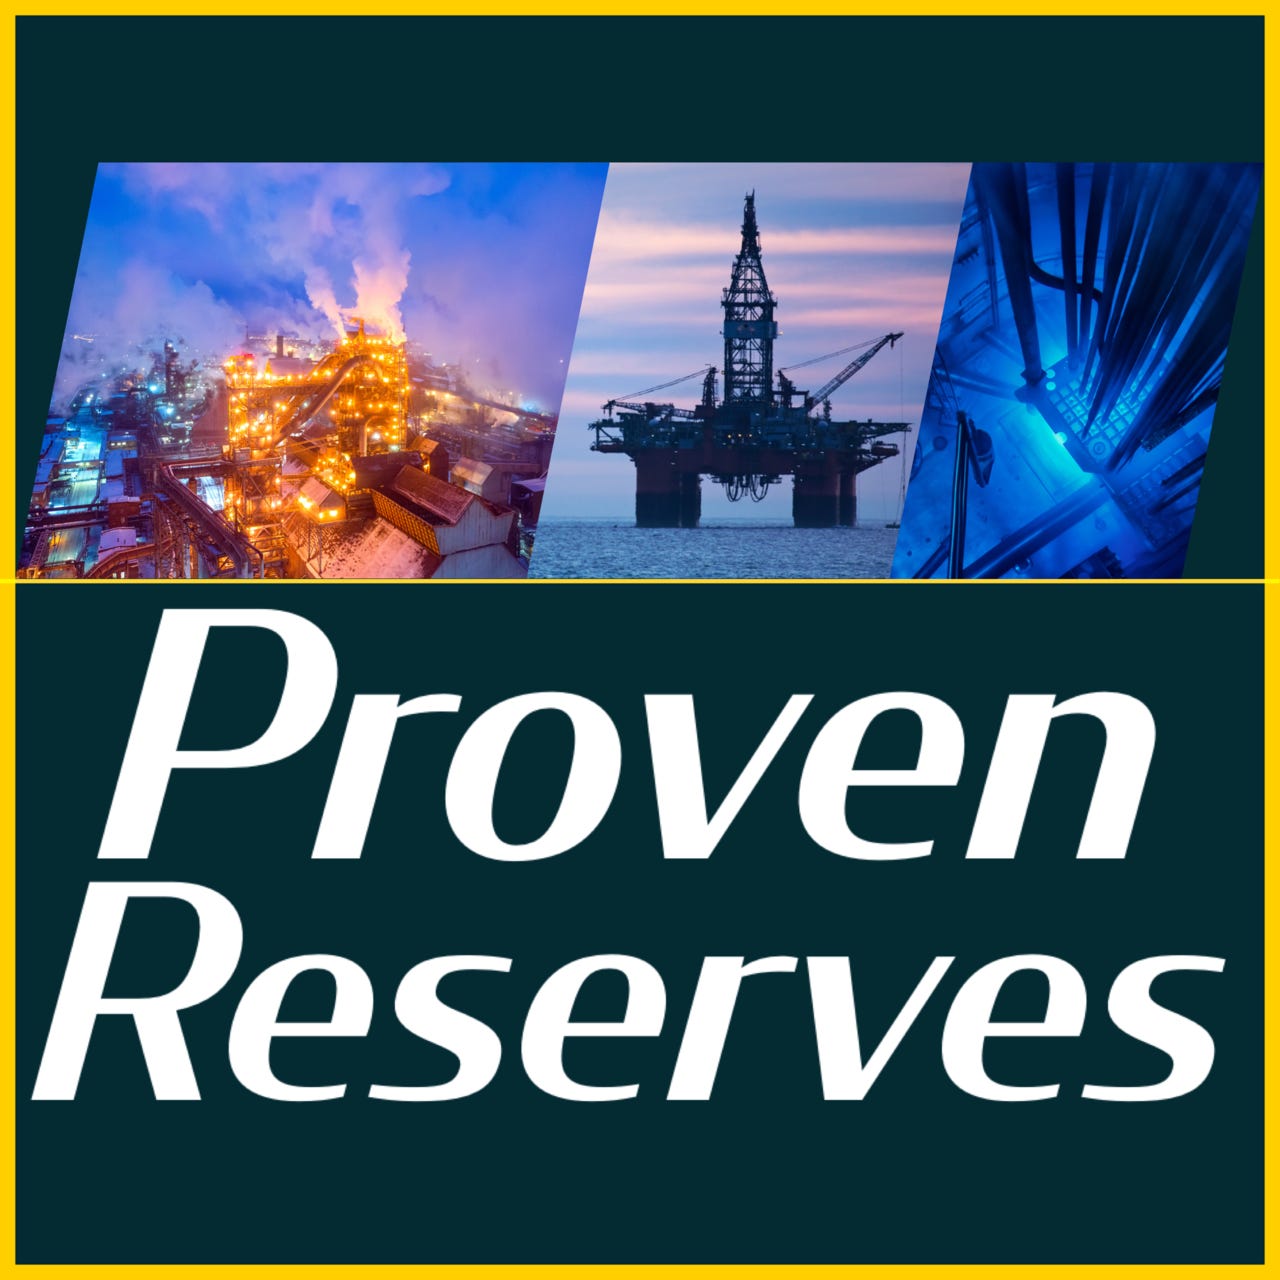 Proven Reserves